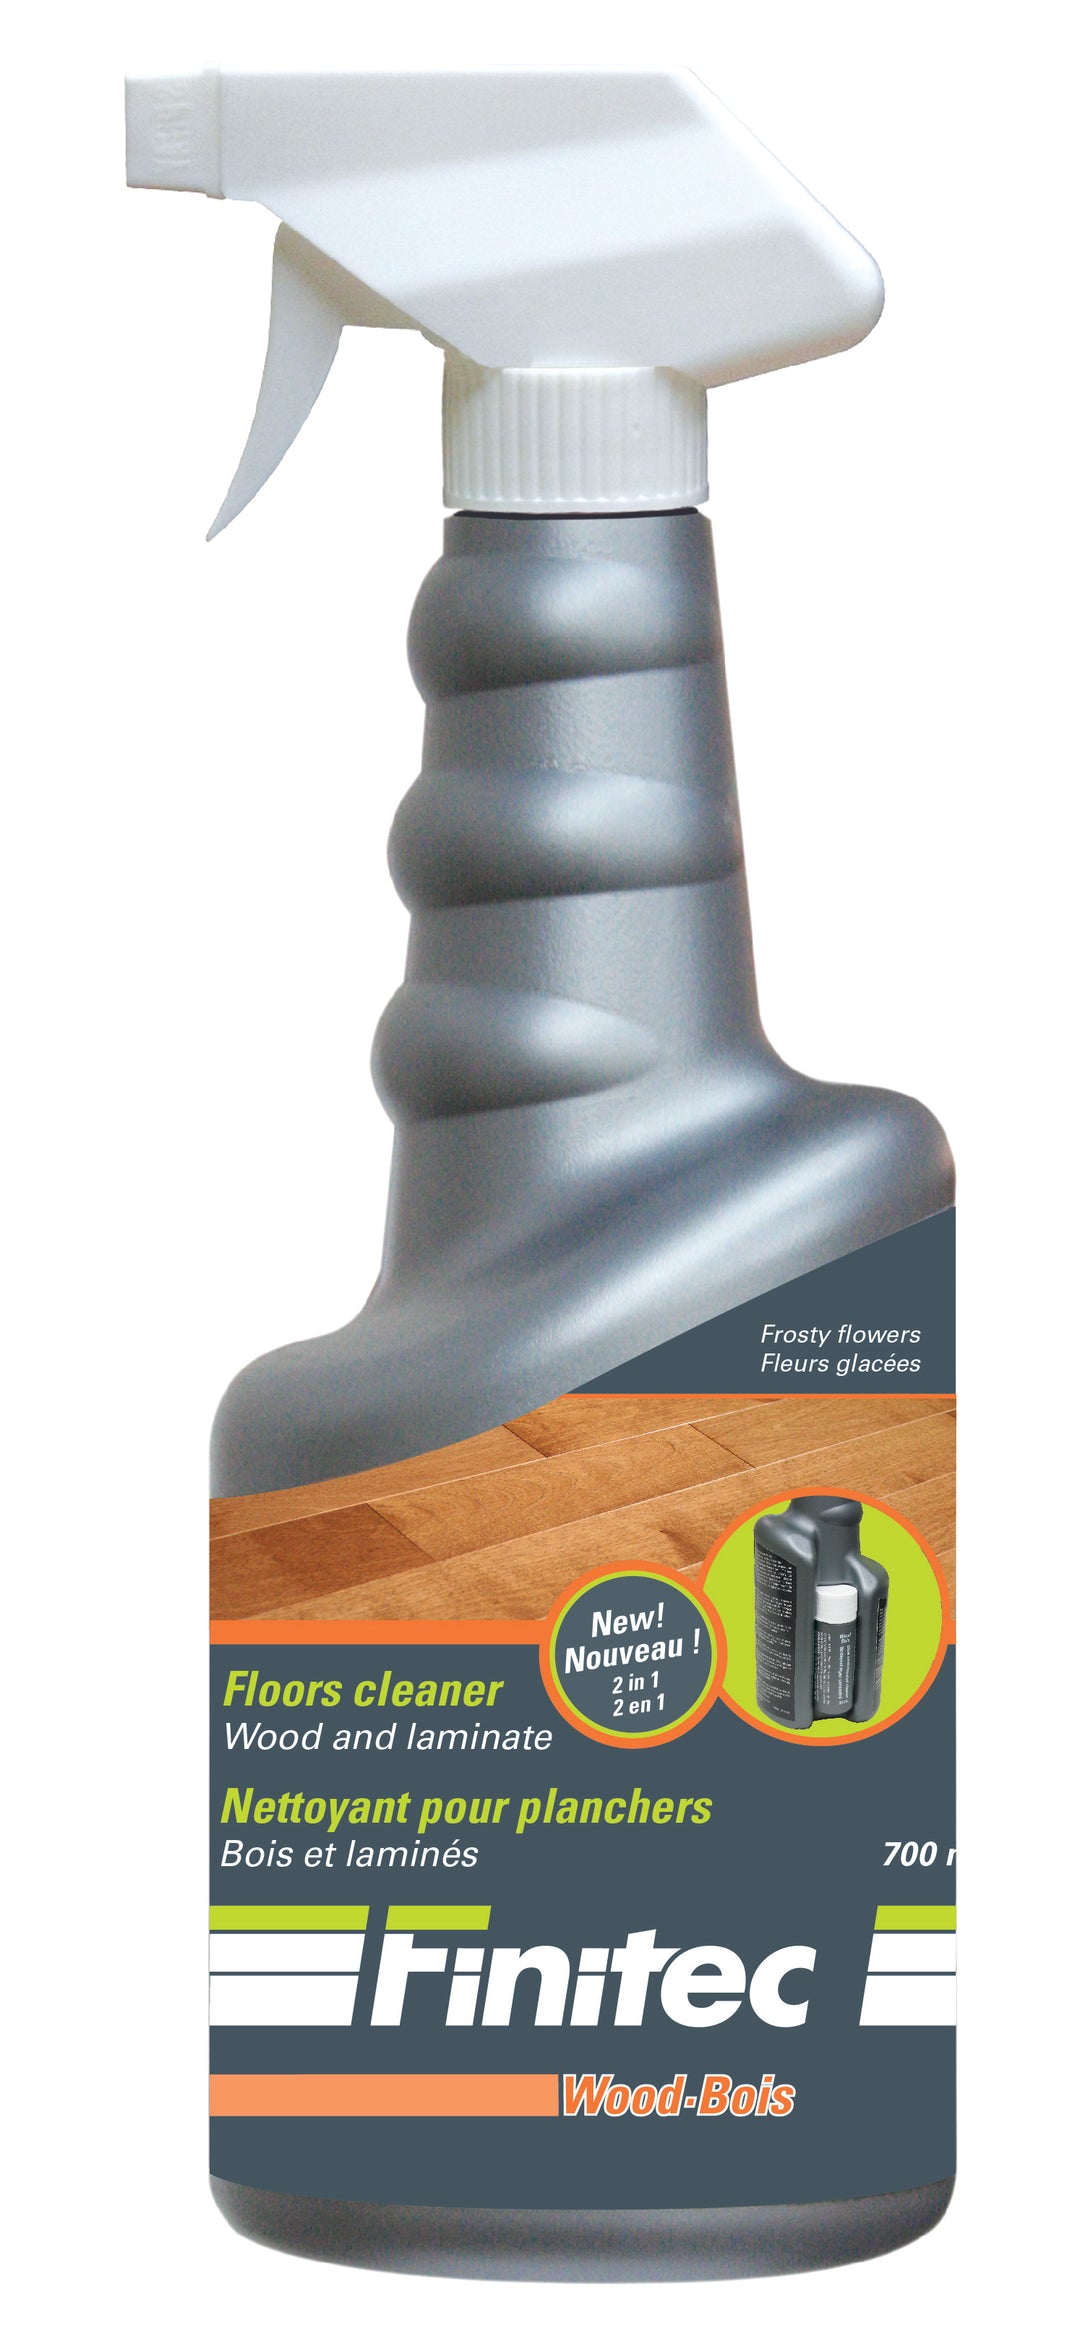 Wood and laminate floor cleaner